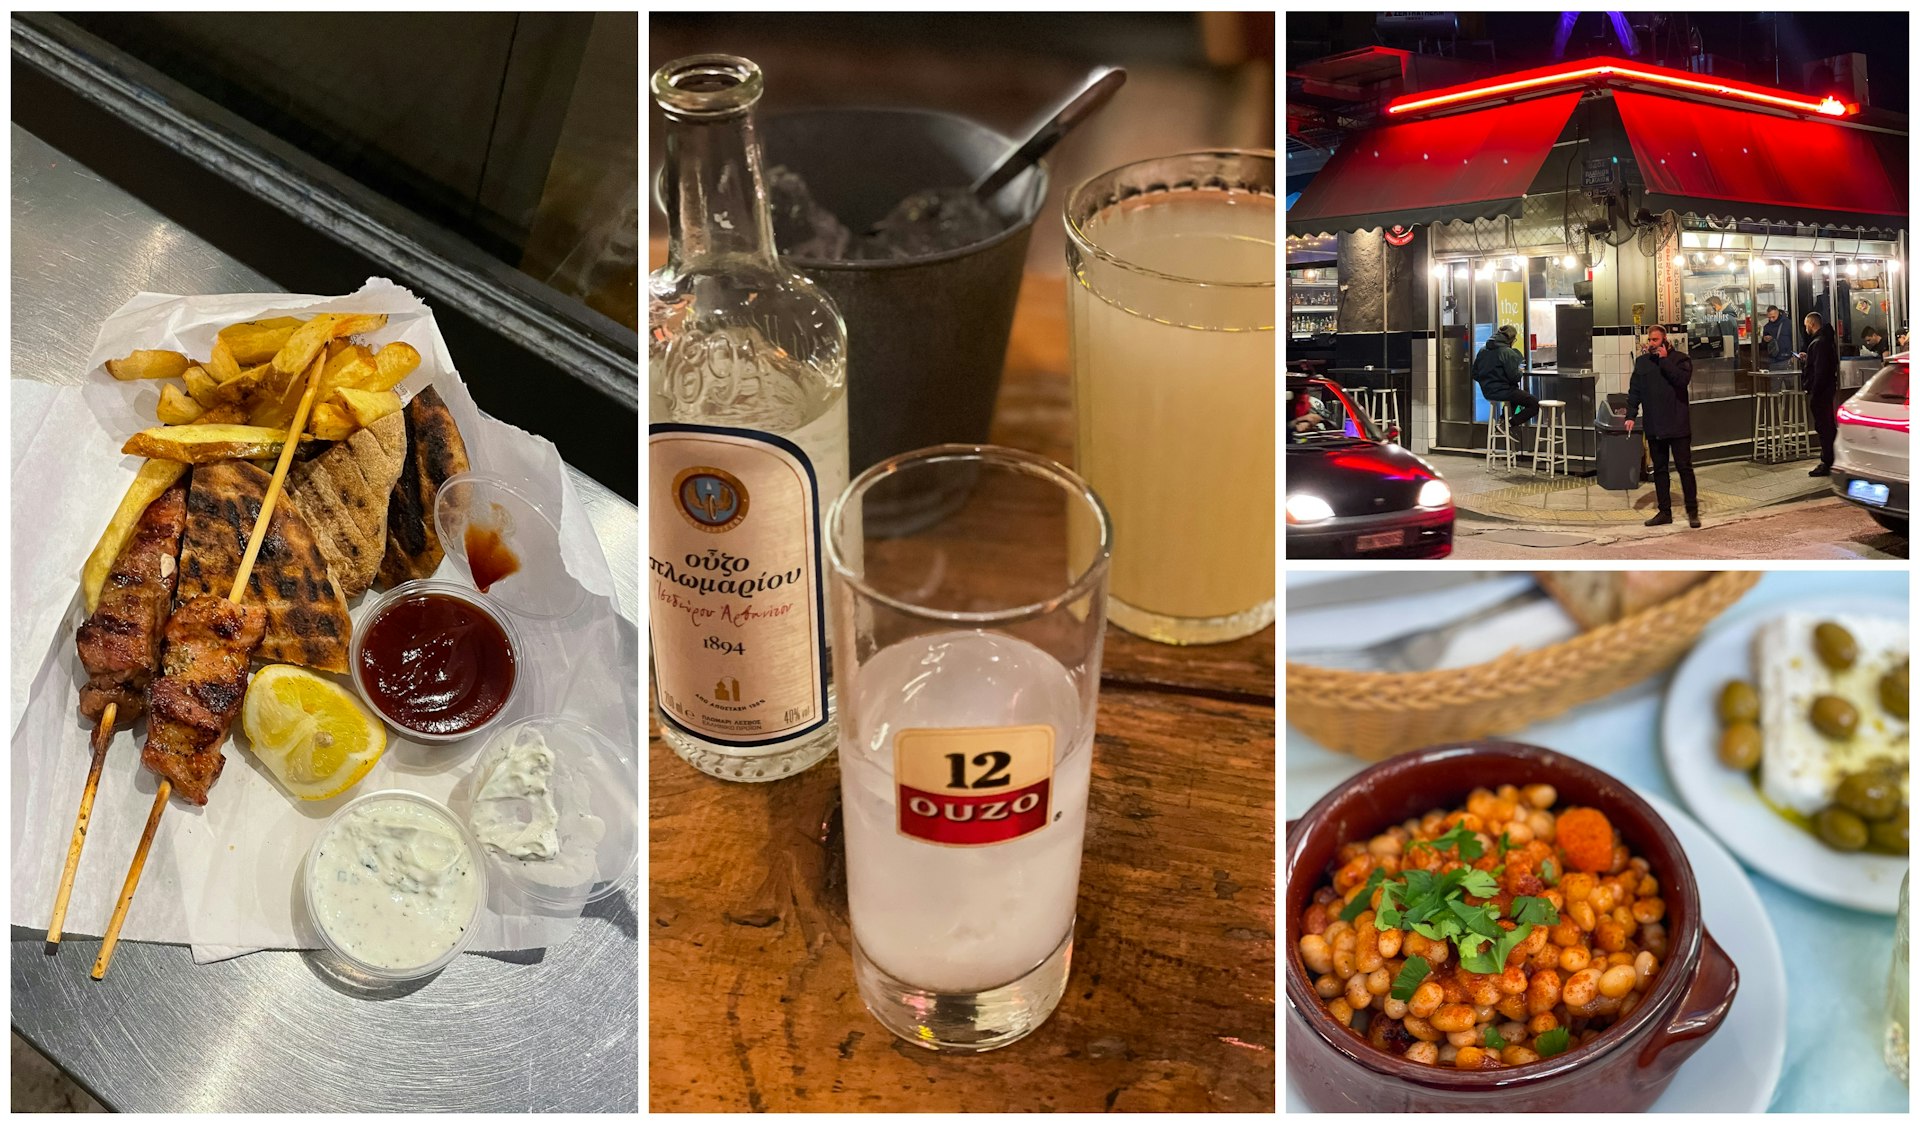 A collage of images featuring traditional Greek cuisine including feta and chickpeas, a photo of a glass of ouzo and the exterior of a bar